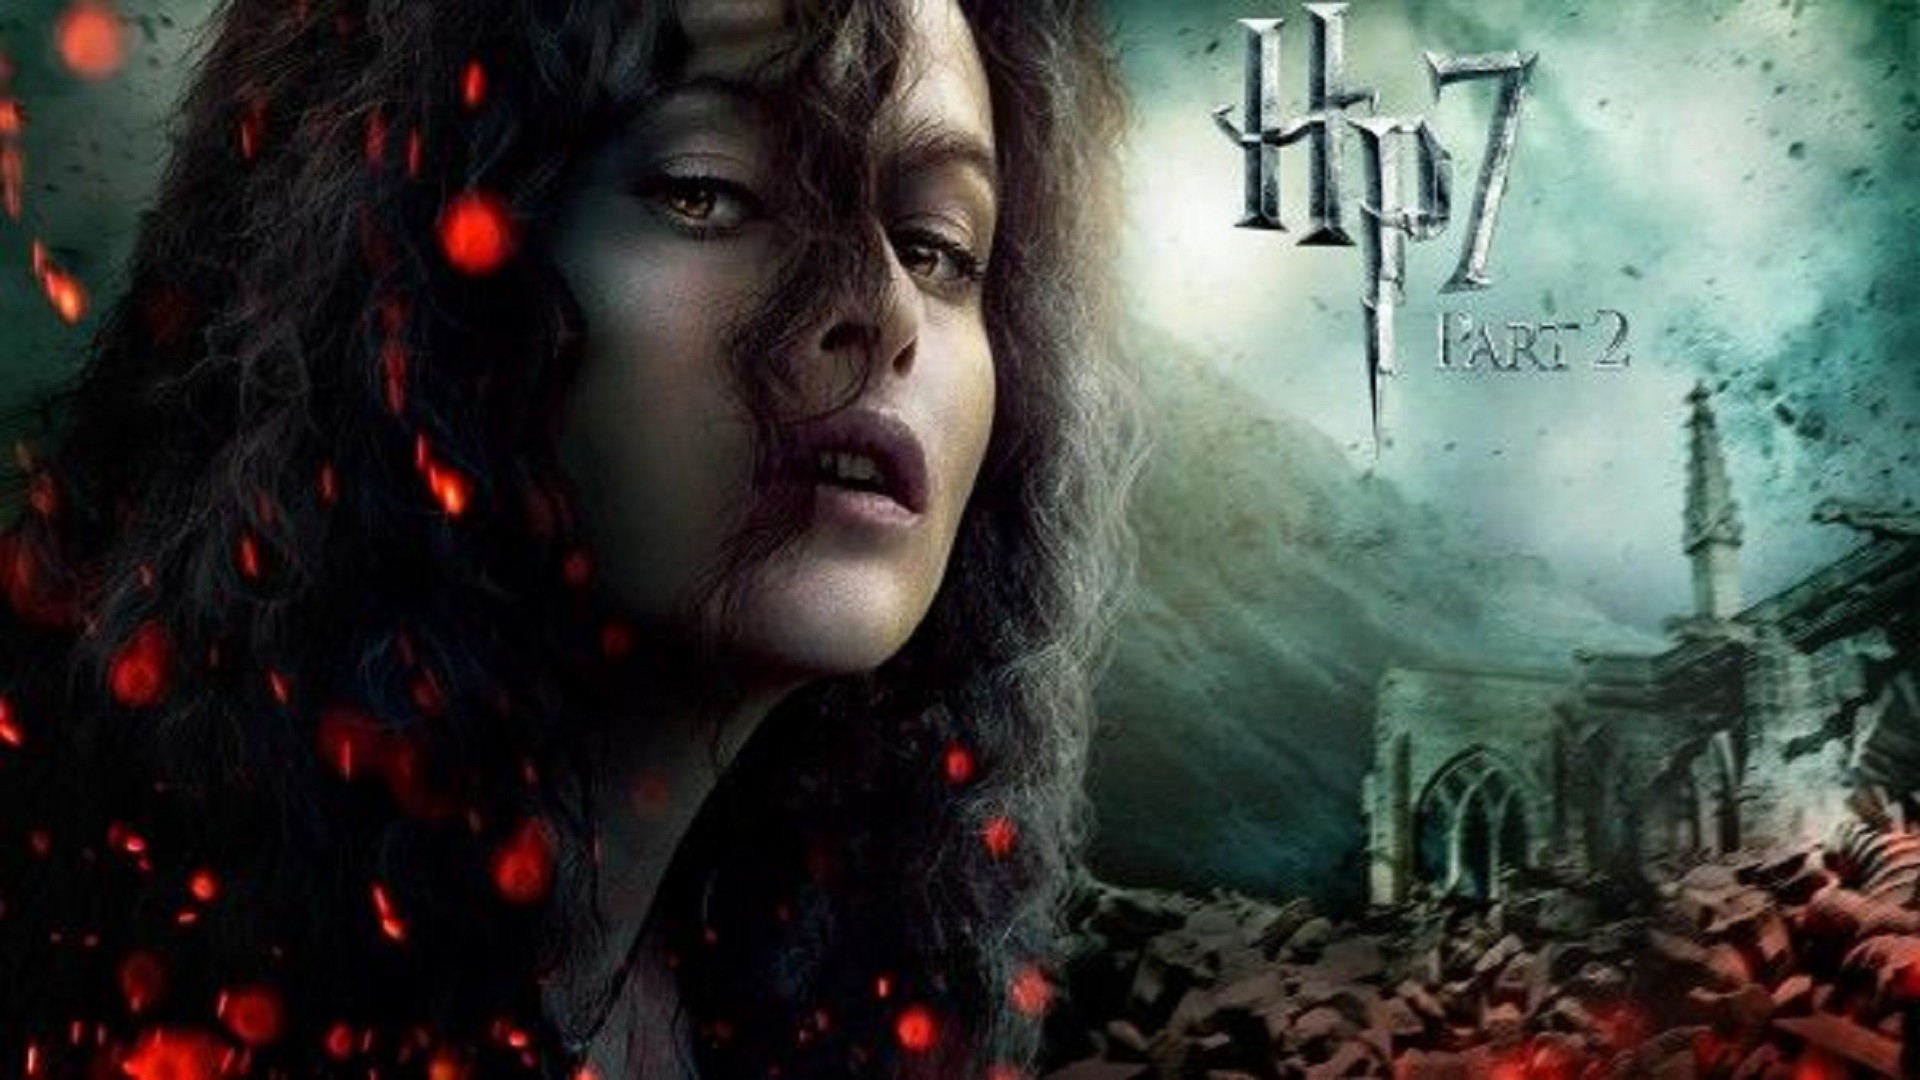 hd free wallpapers harry potter free download